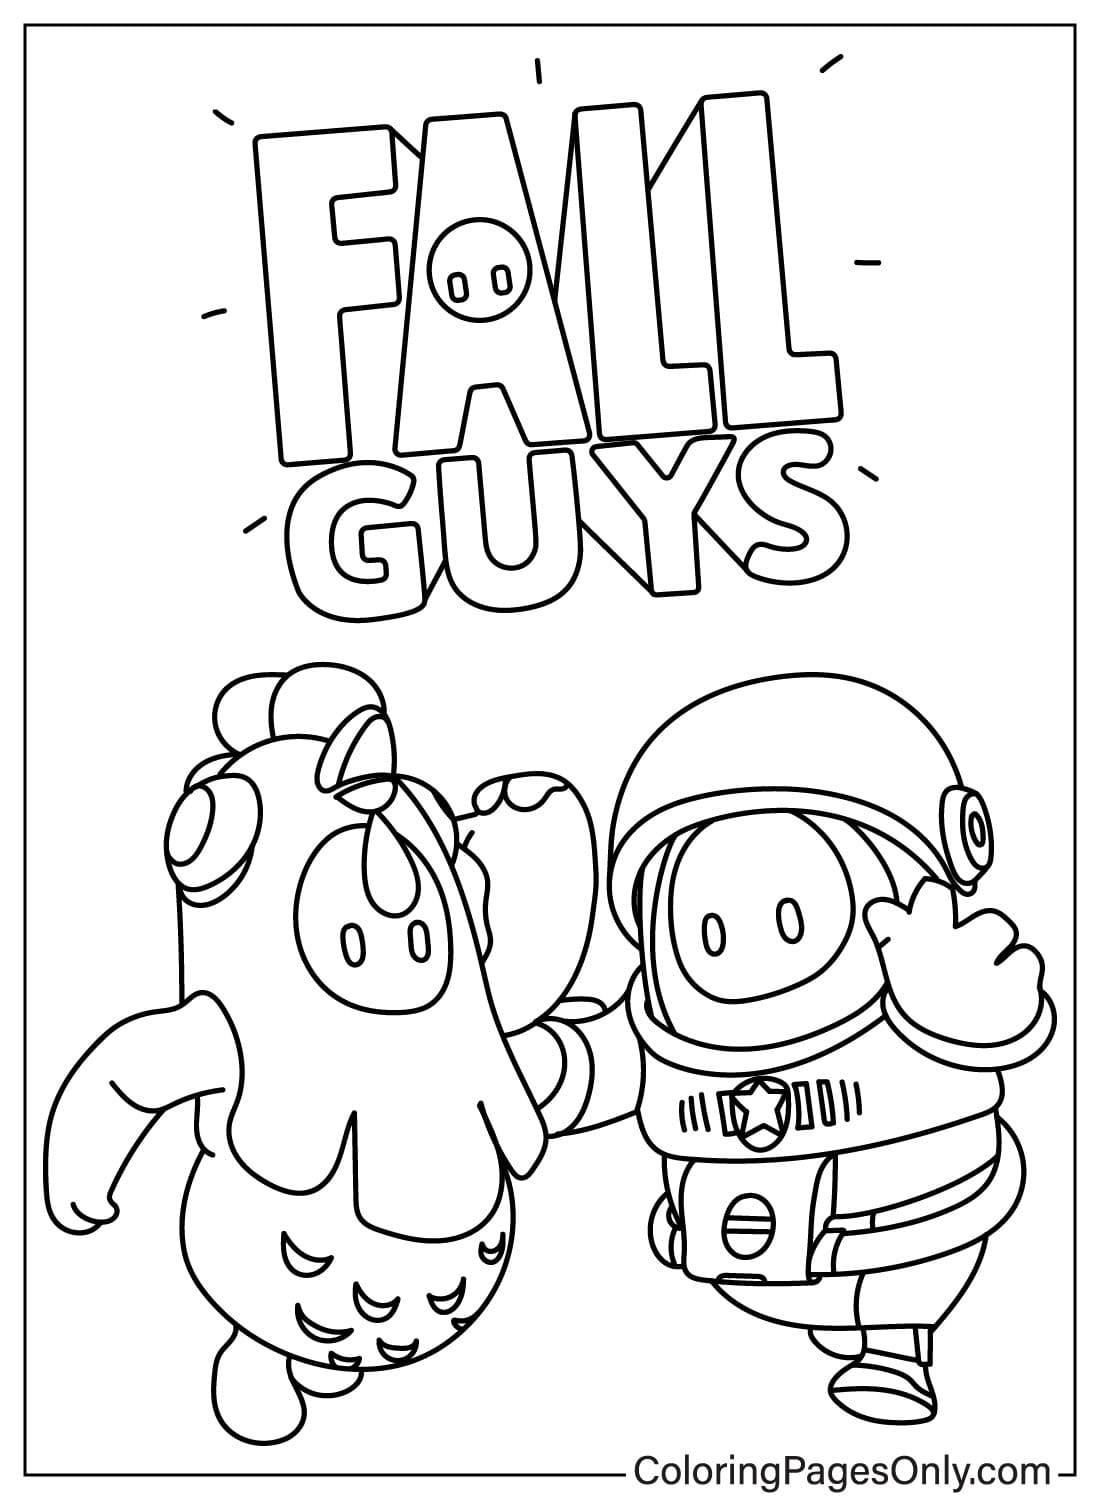 Fall Guys Astronaut and Chicken from Fall Guys